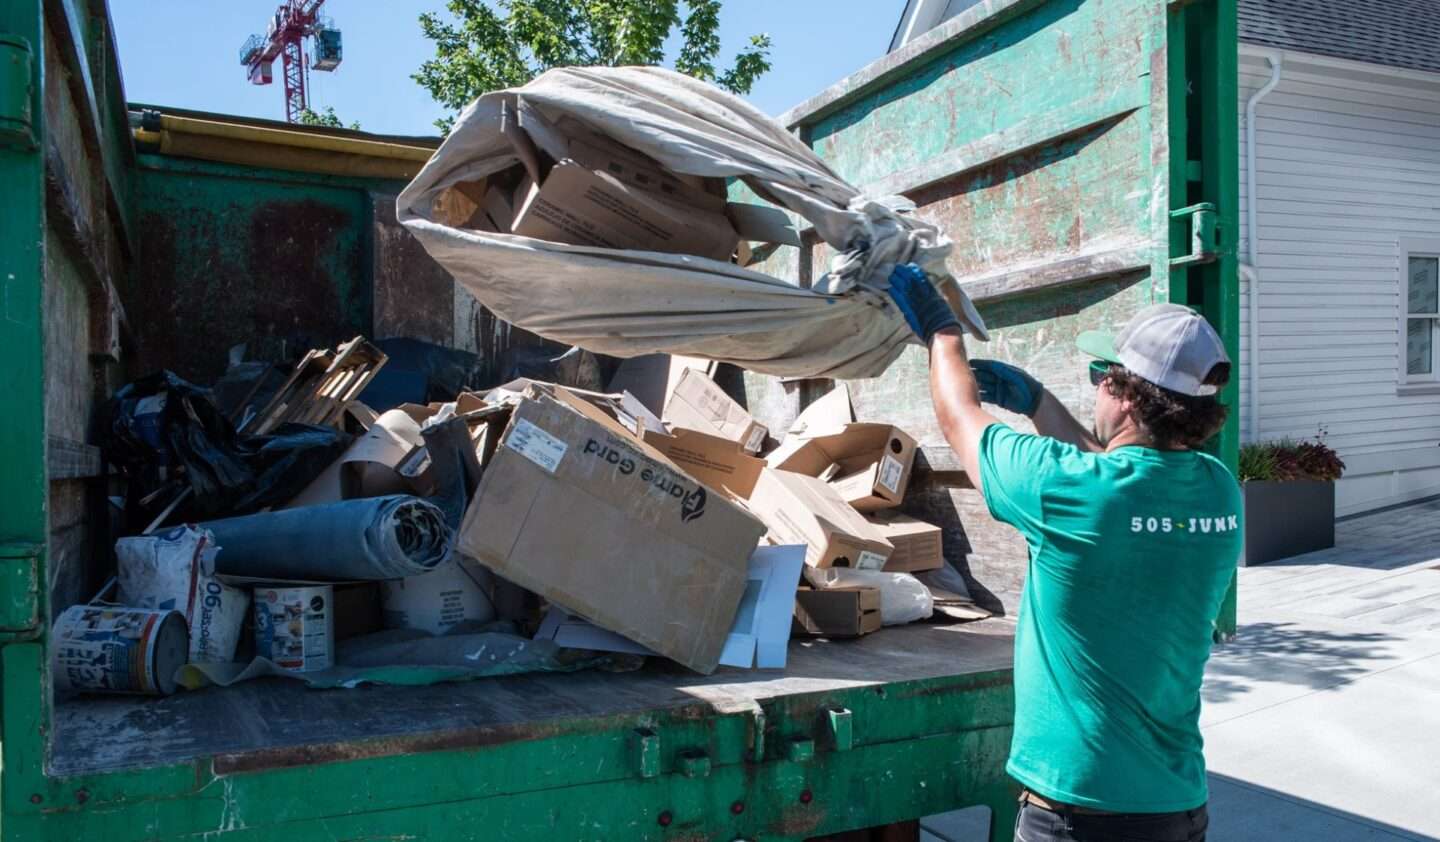 A 505-Junk employee throwing debris into the back of the truck during a renovation removal in Surrey.